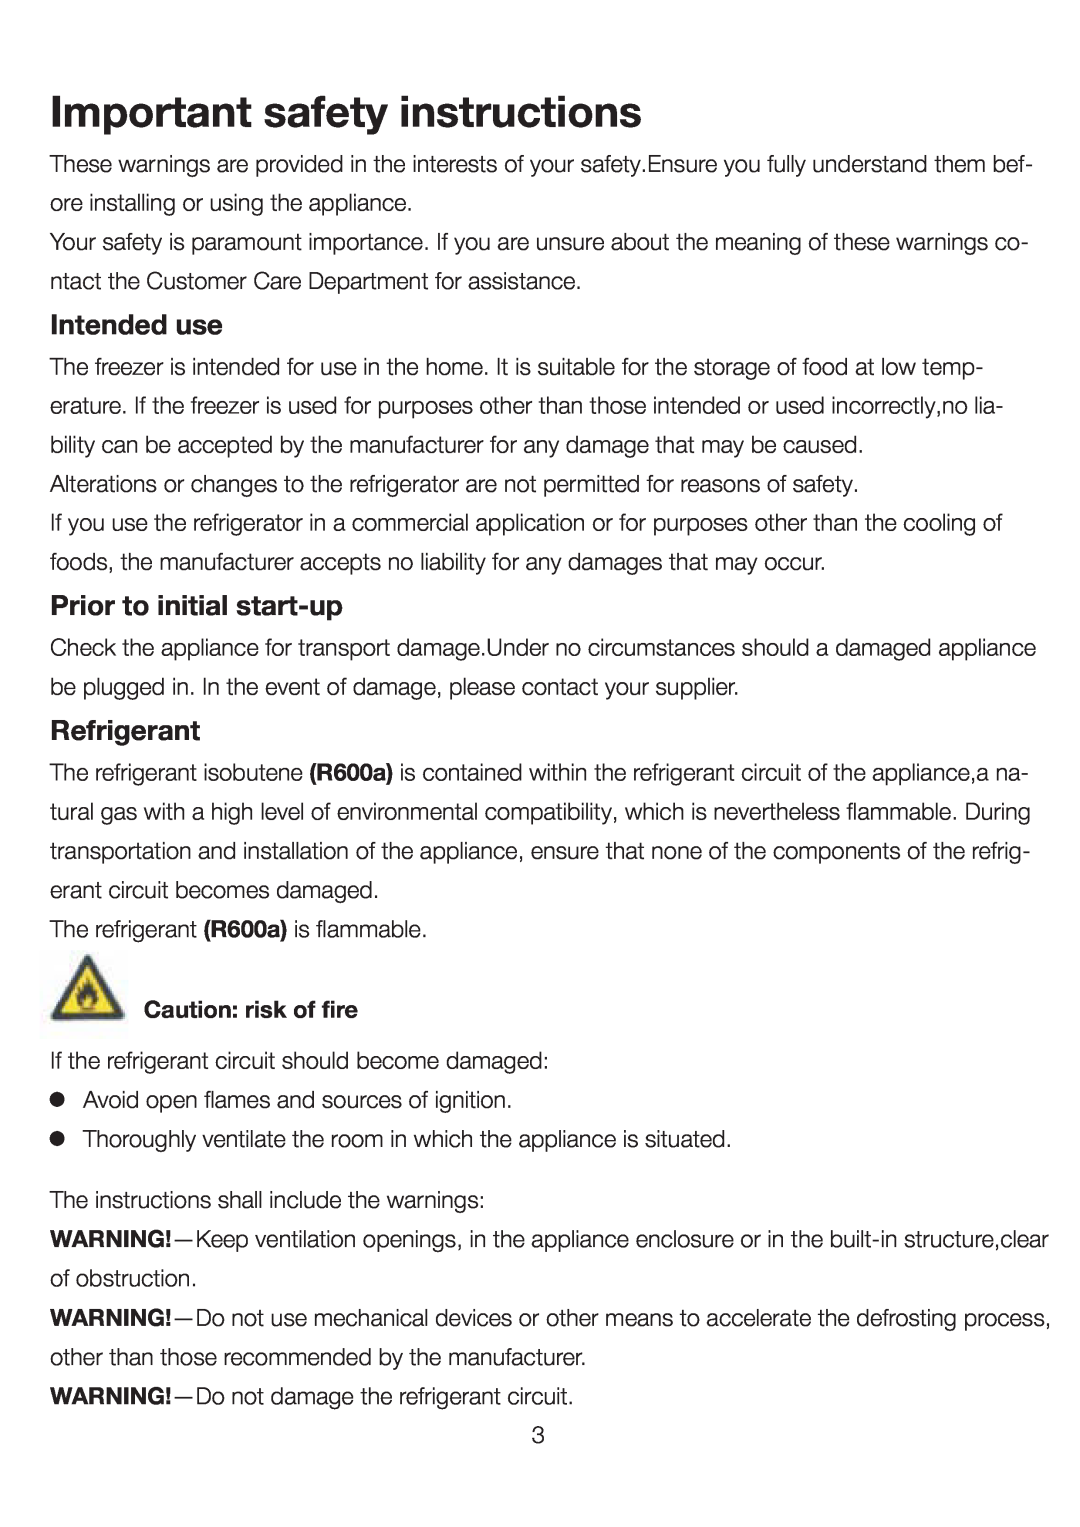 Ariston UP 350 FI (FE) manual Important safety instructions, Intended use, Prior to initial start-up, Refrigerant 